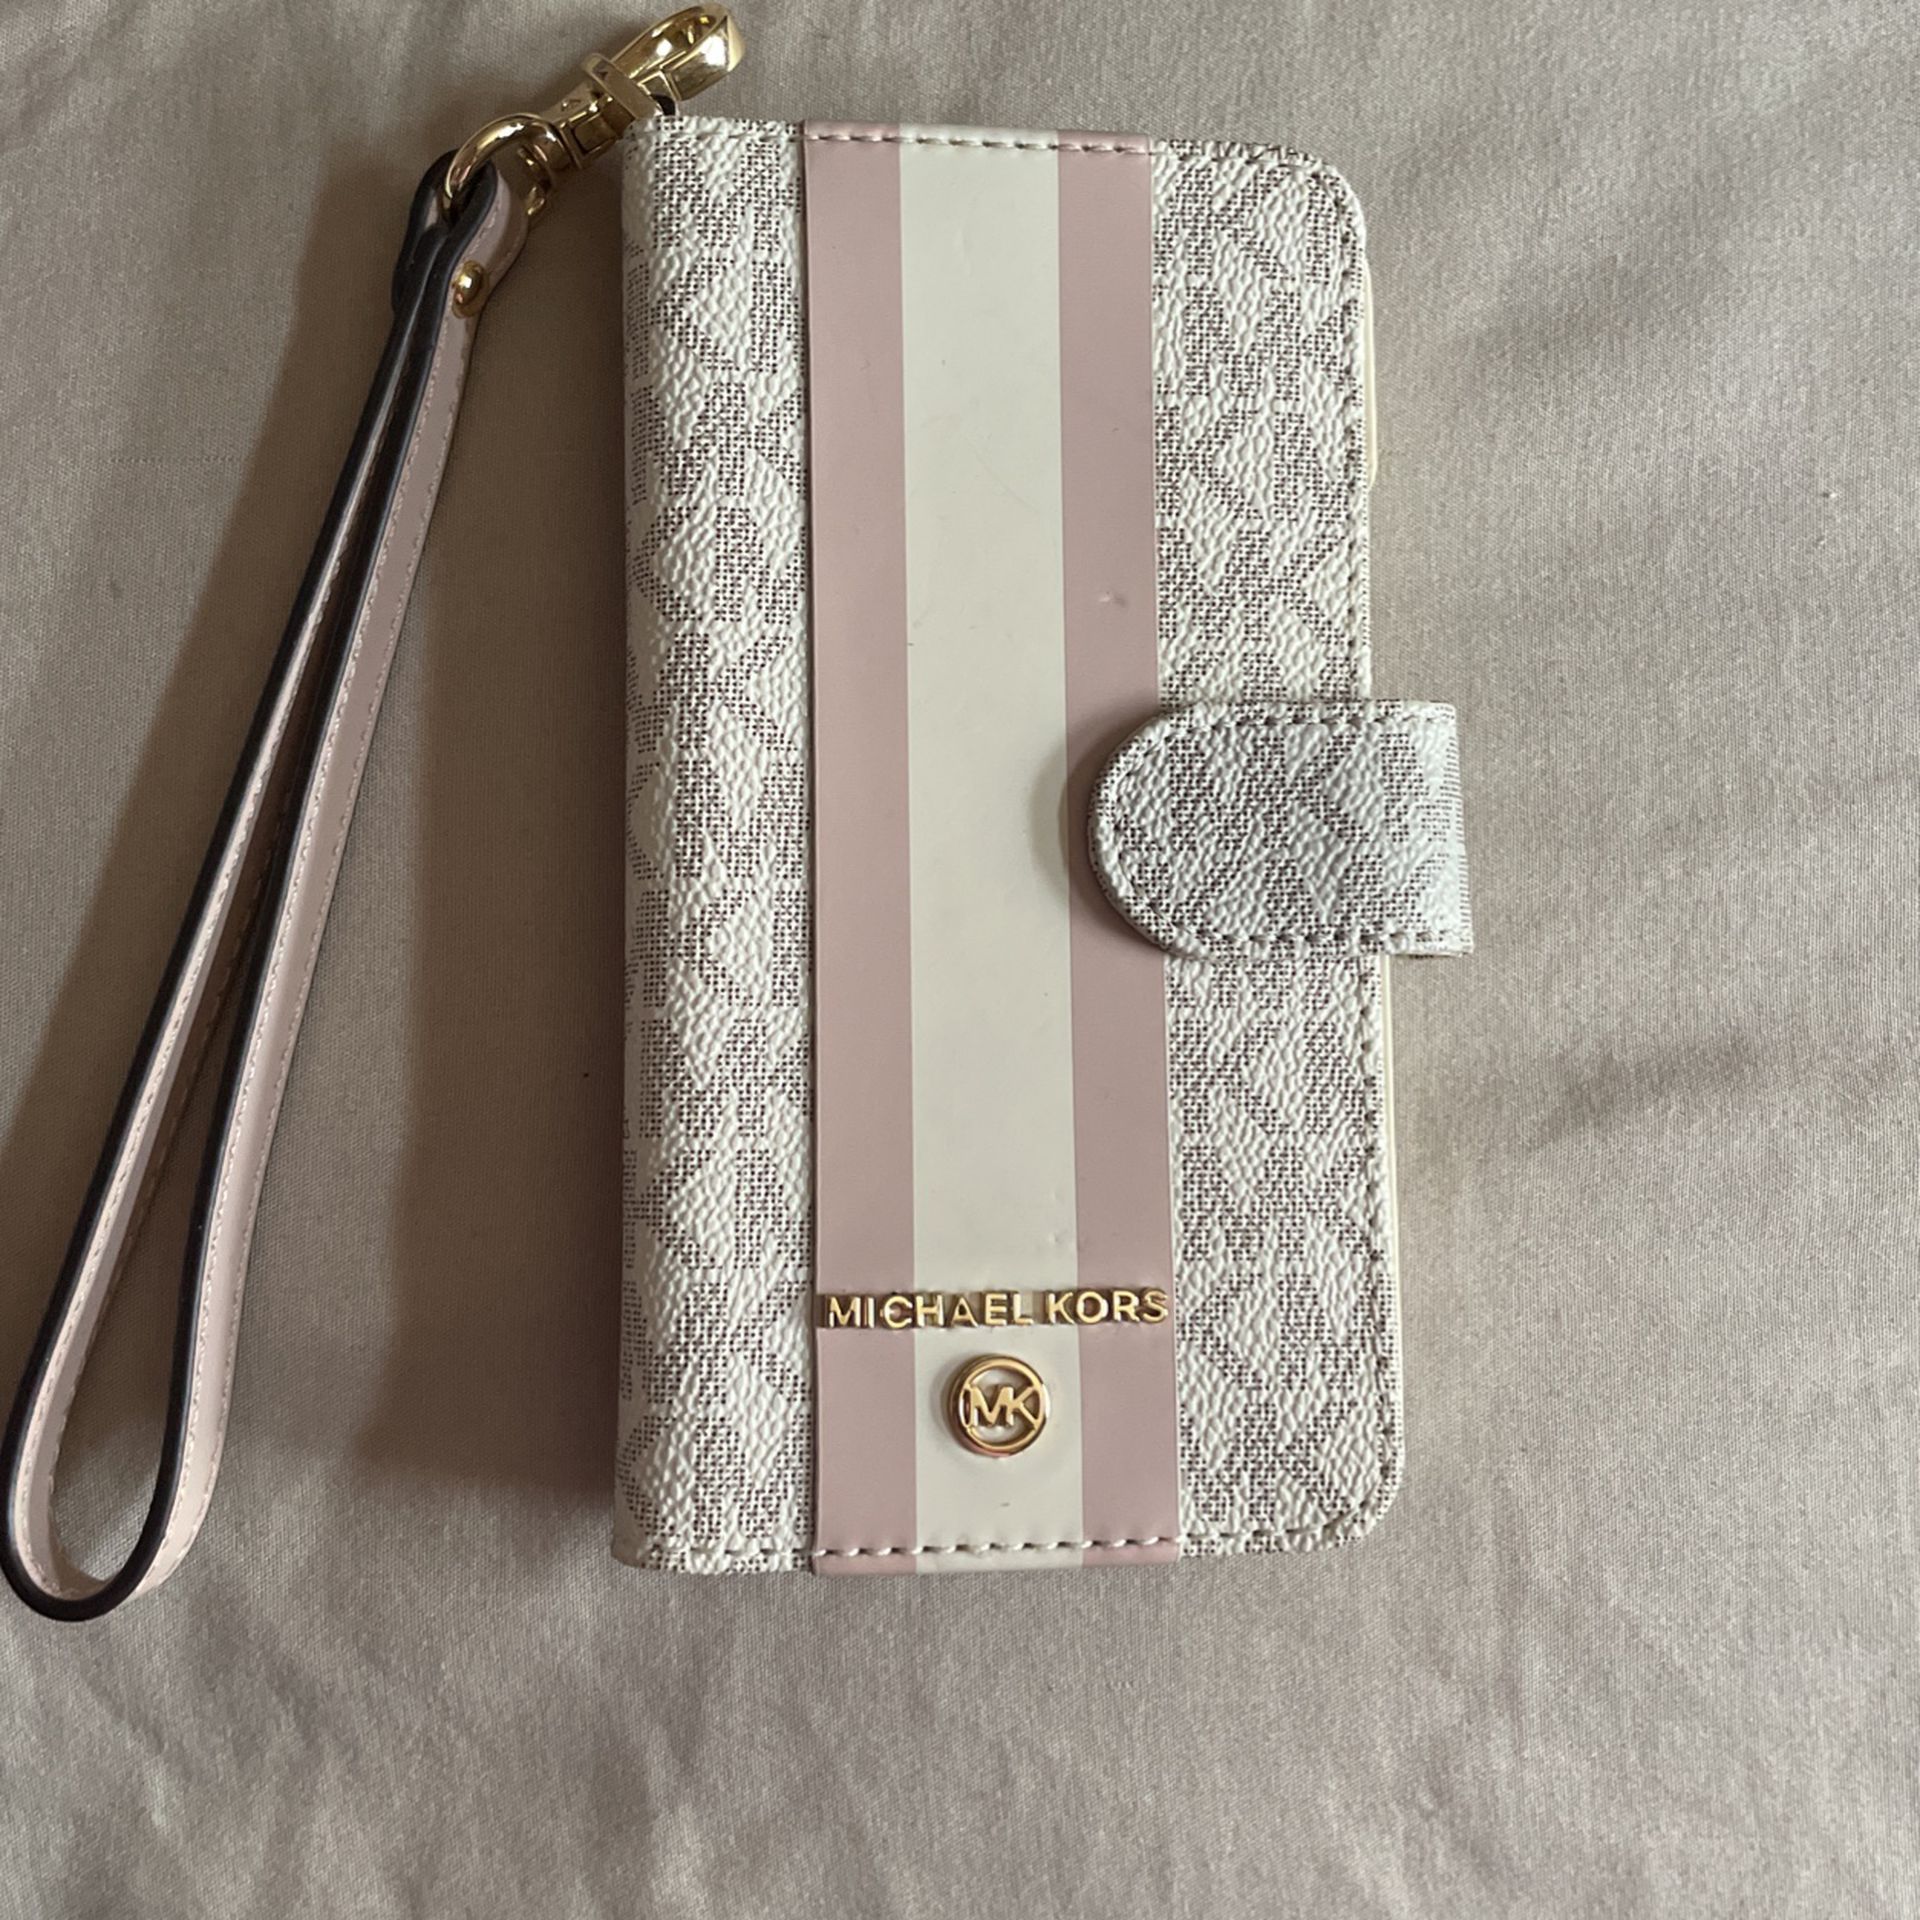 Michael Kors iPhone Case for Sale in Los Angeles, CA - OfferUp